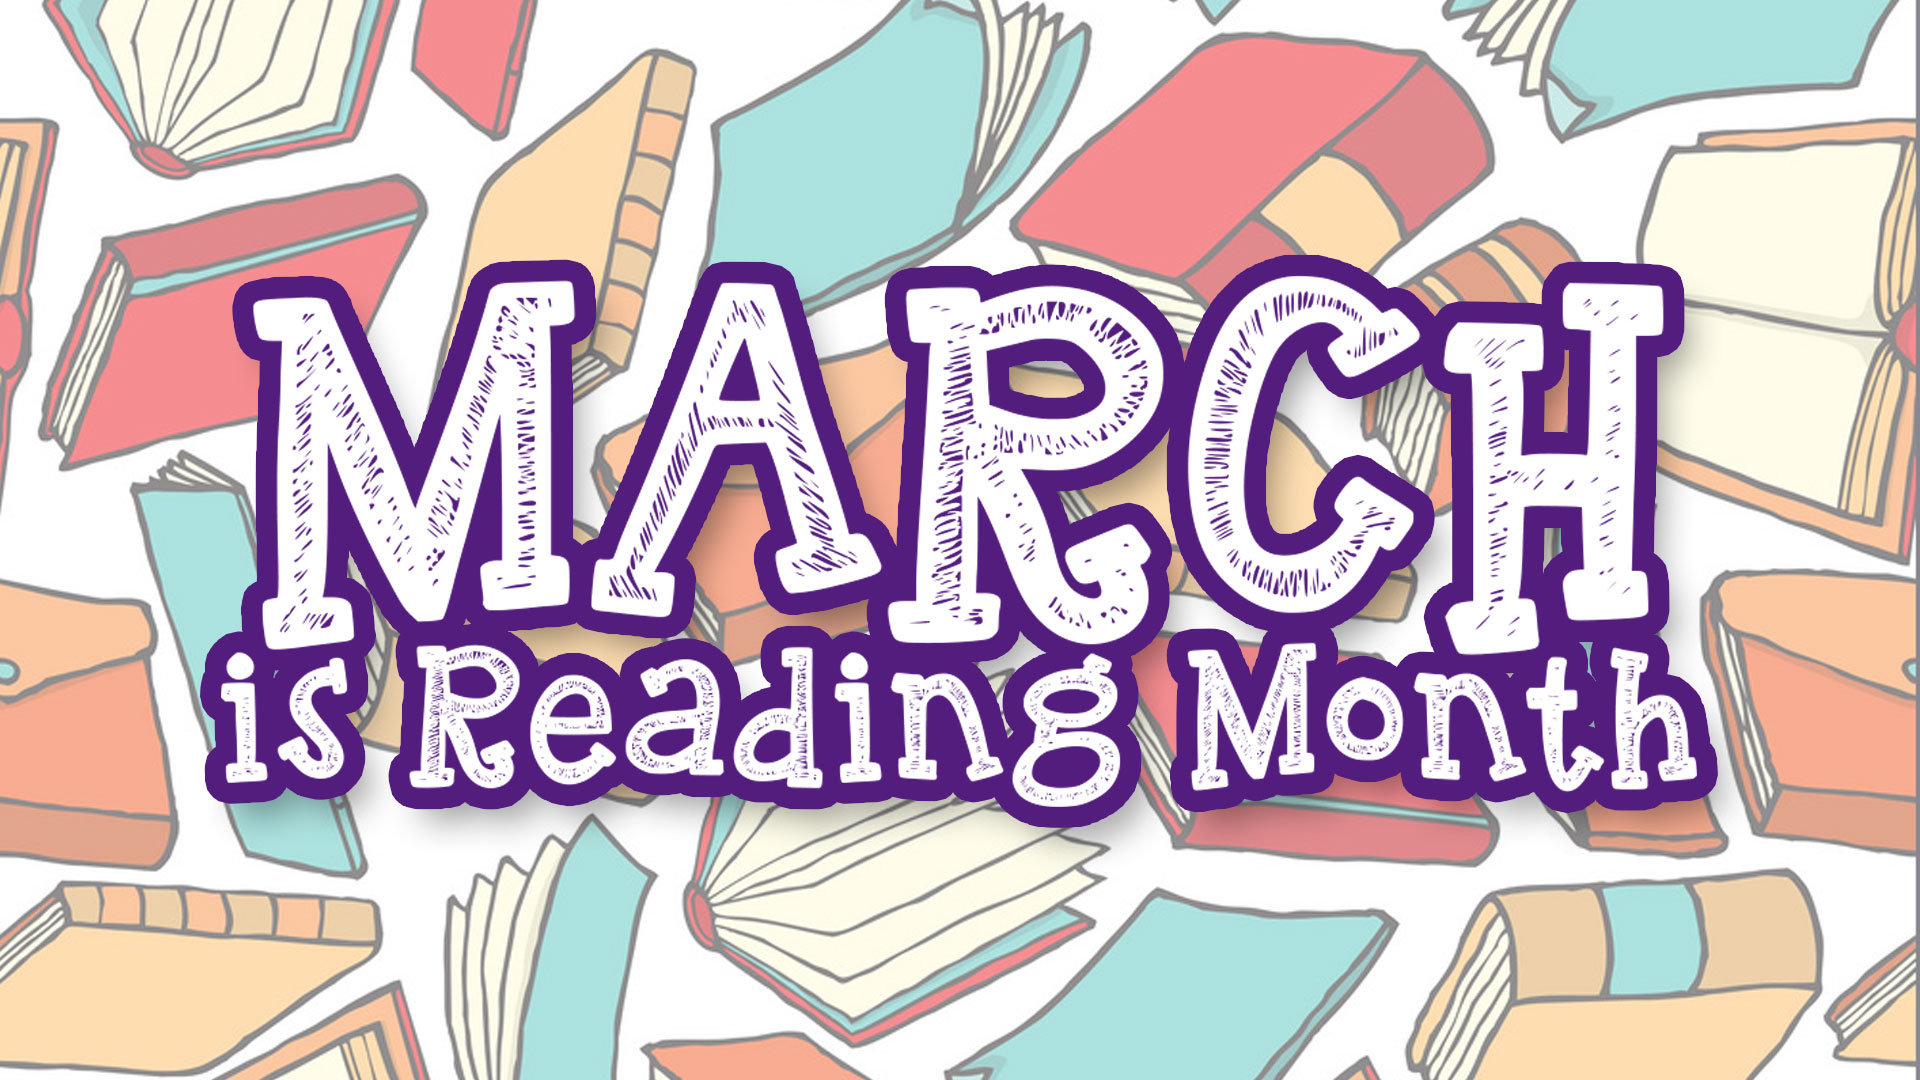 illustrated books open and closed in the background. Purple Text reading "March is Reading Month"